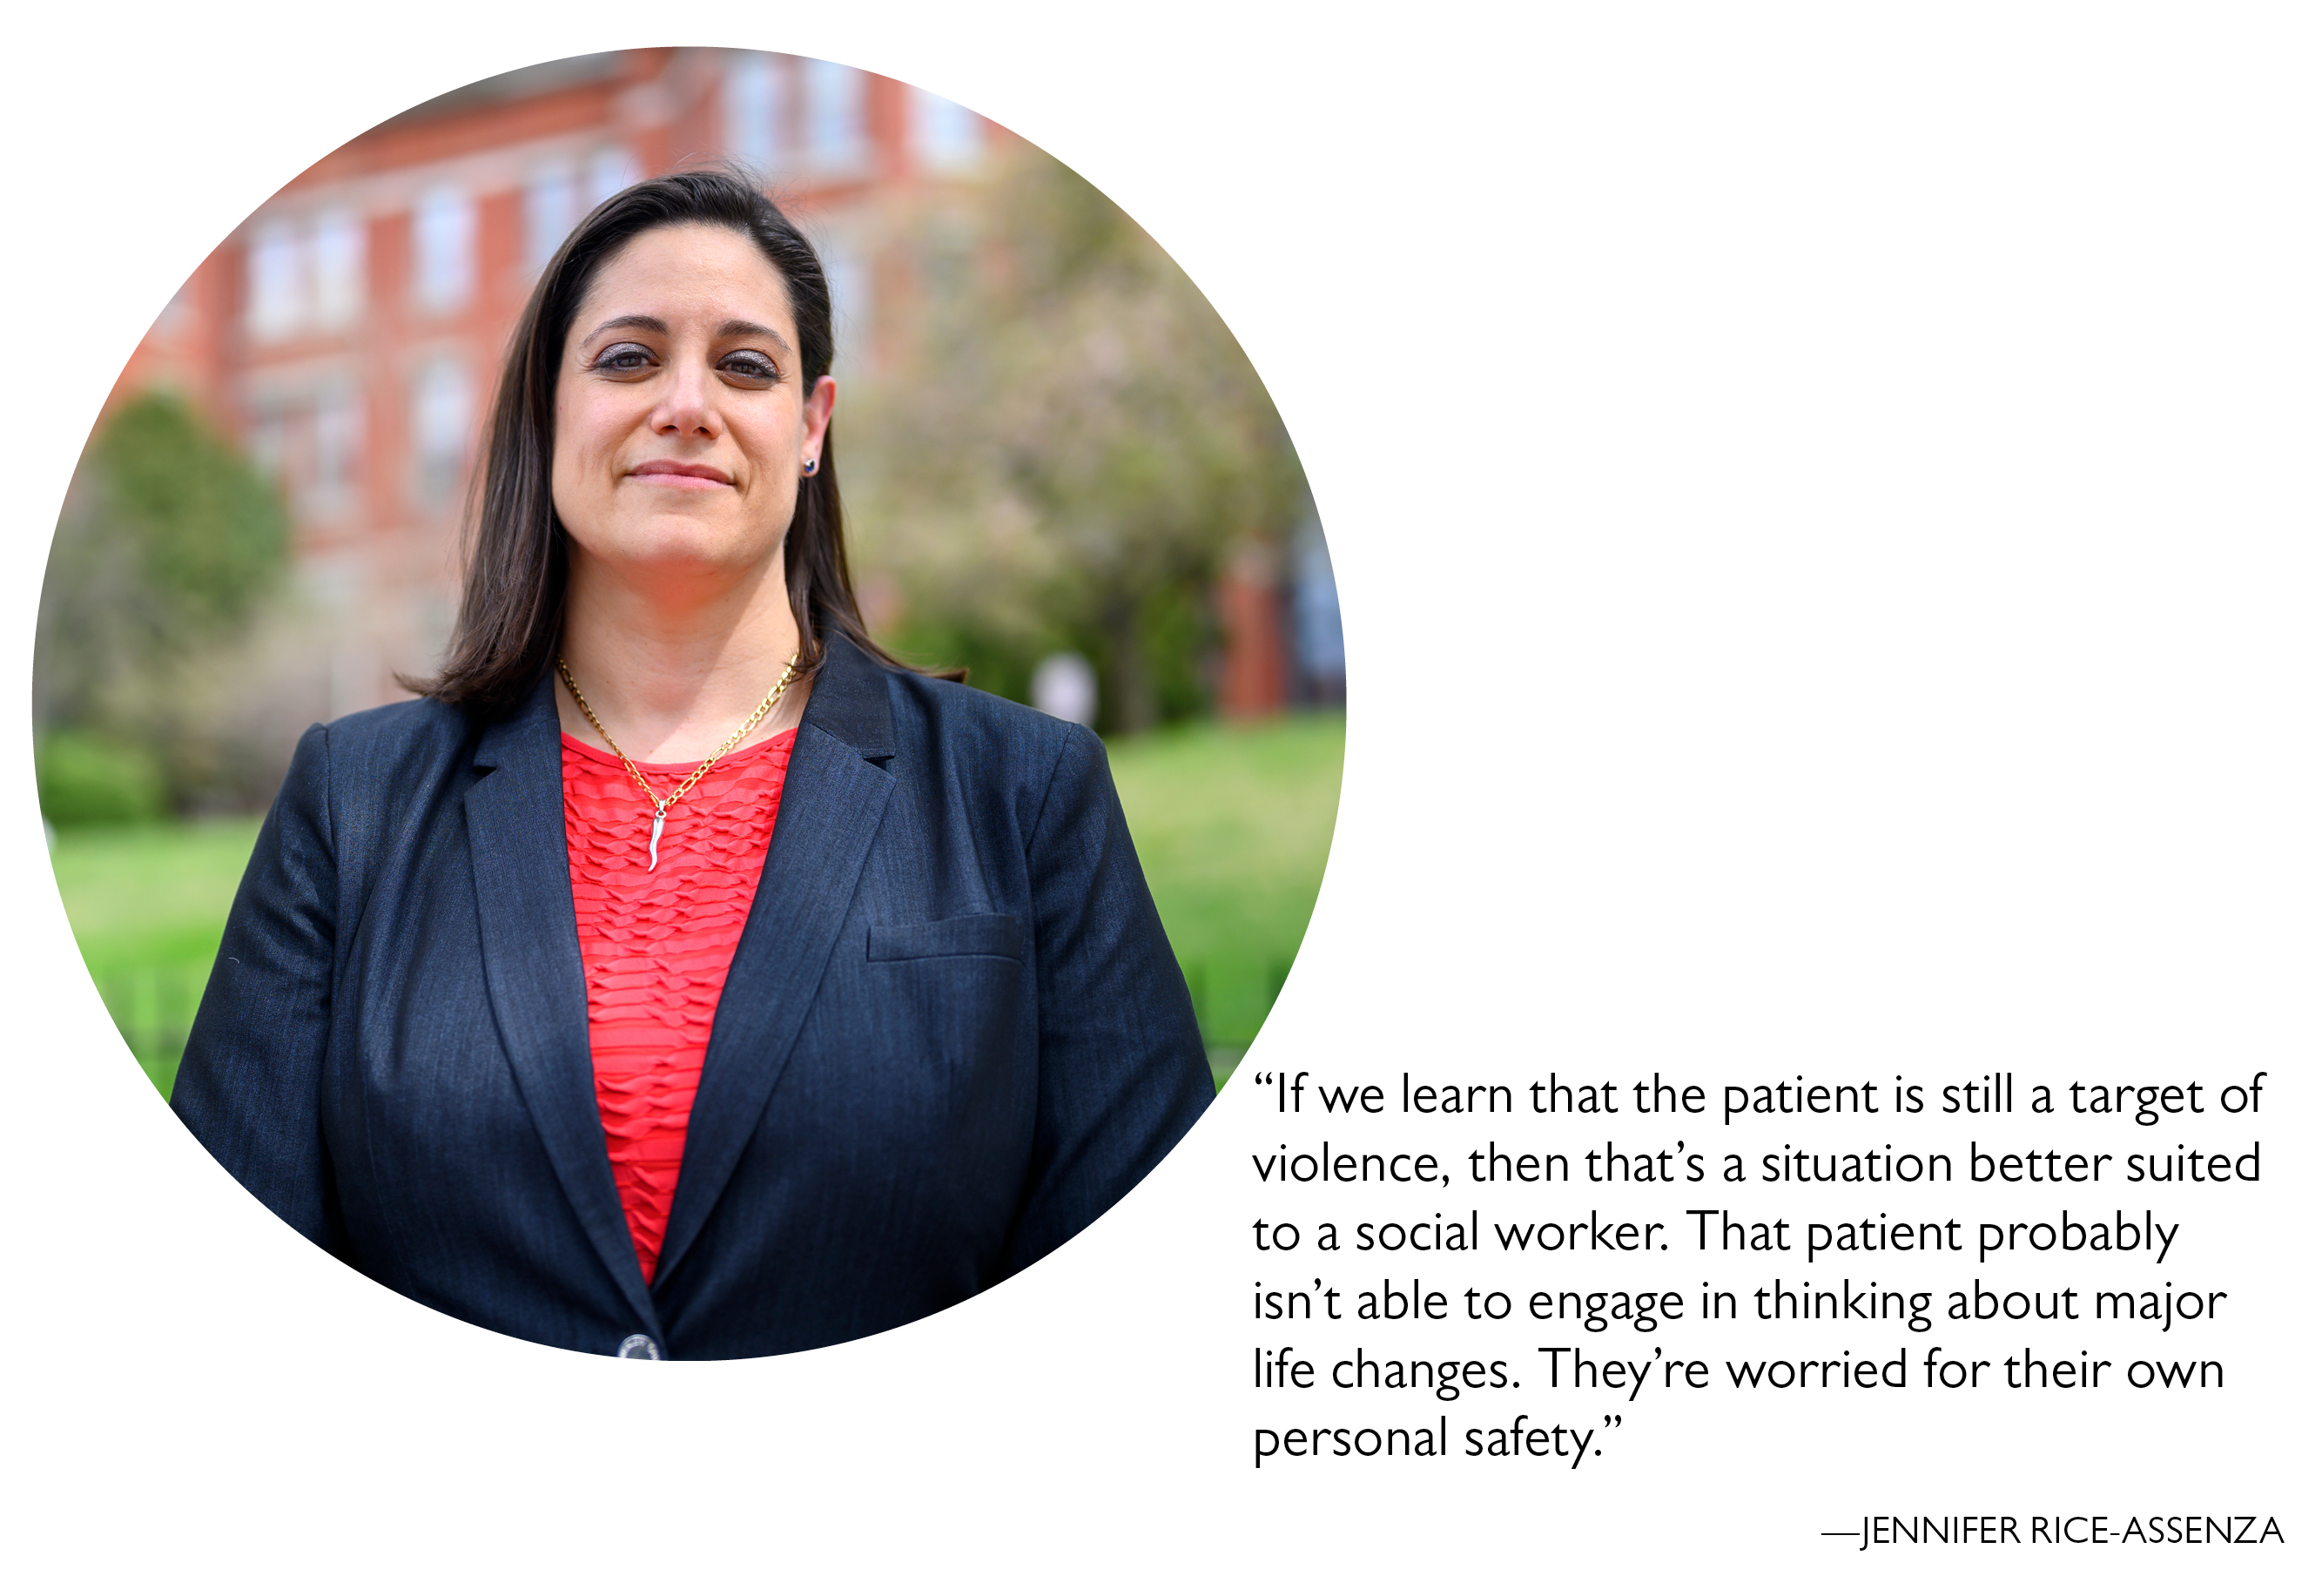 “If we learn that the patient is still a target of violence, then that’s a situation better suited to a social worker. That patient probably isn’t able to engage in thinking about major life changes. They’re worried for their own personal safety.” —Jennifer Rice-Assenza